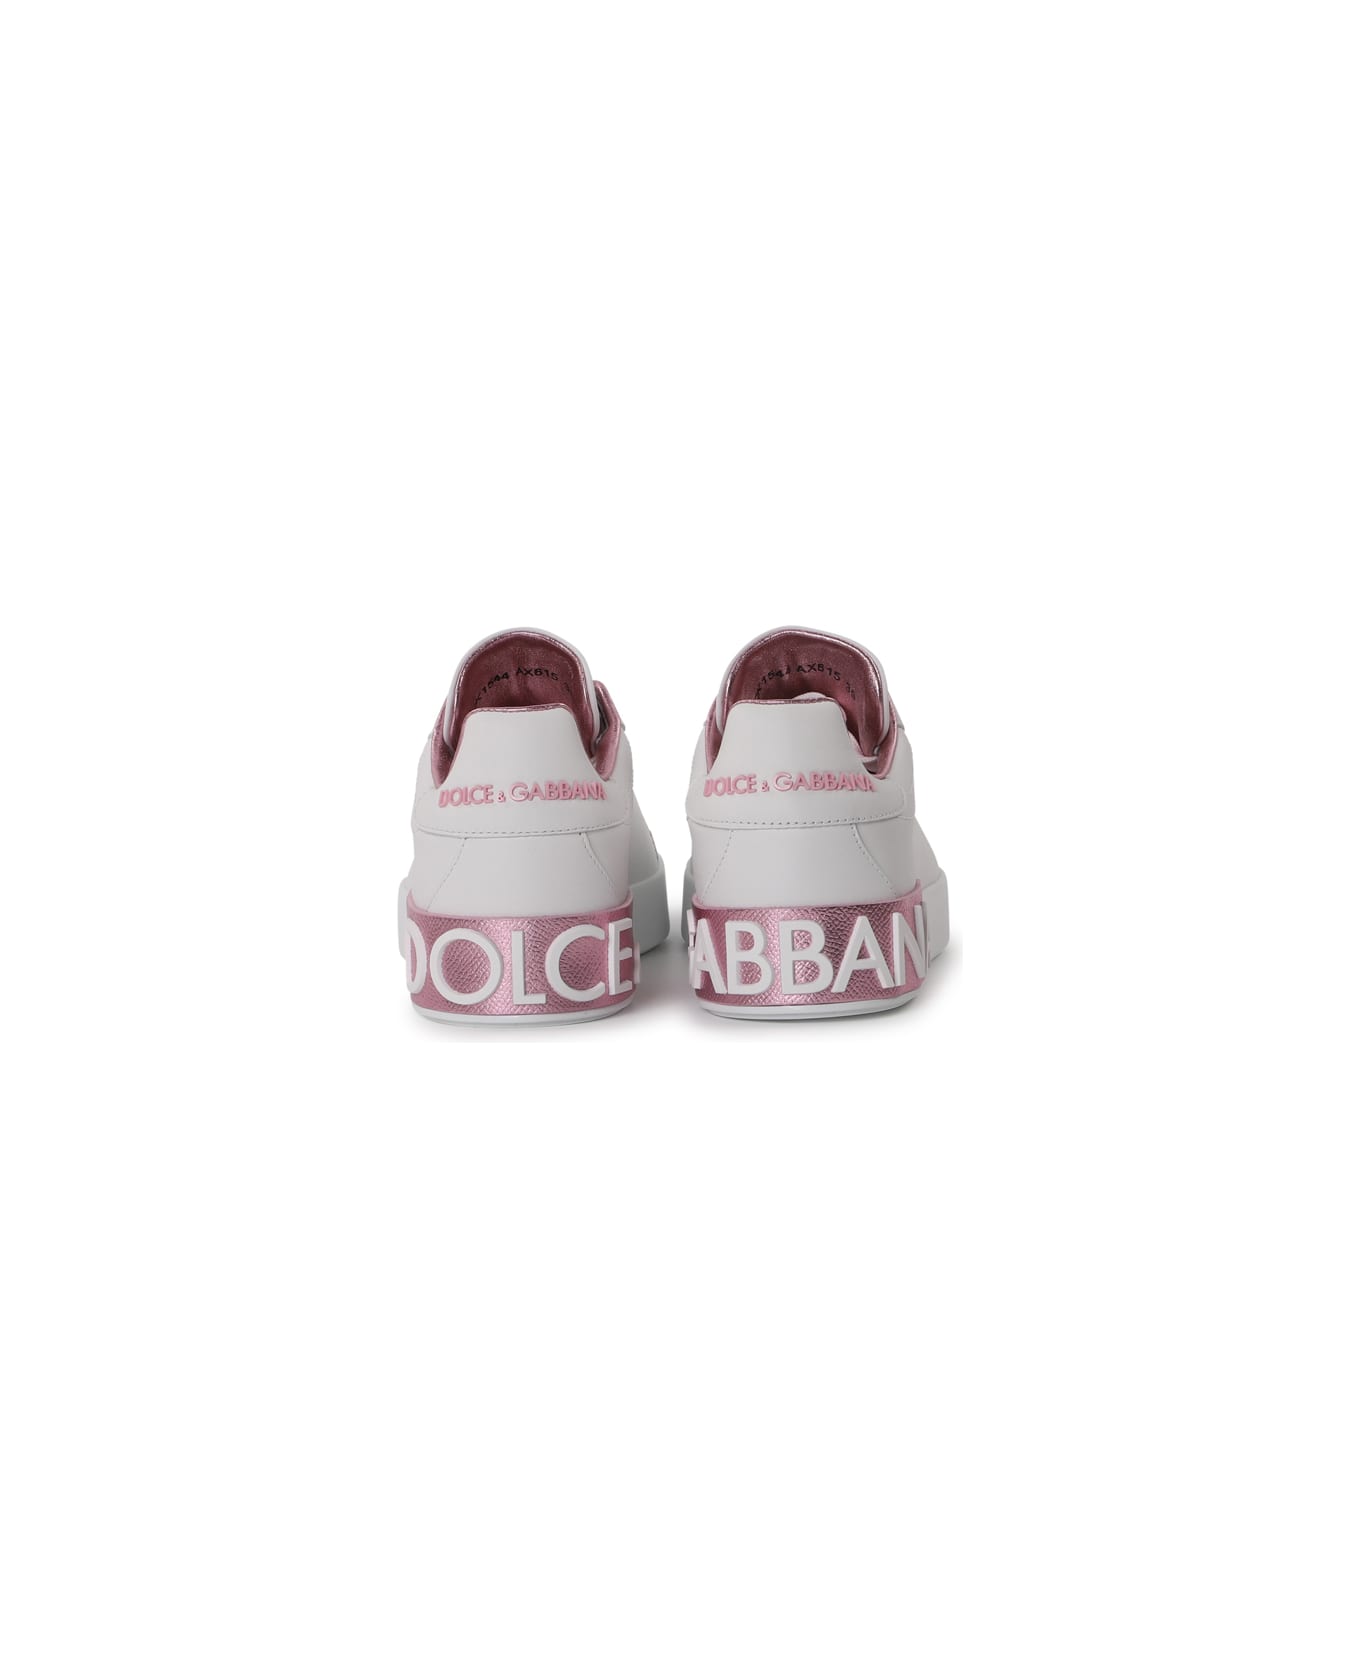 Dolce & Gabbana Portofino Sneakers In Leather With Contrasting Inserts - White/pink